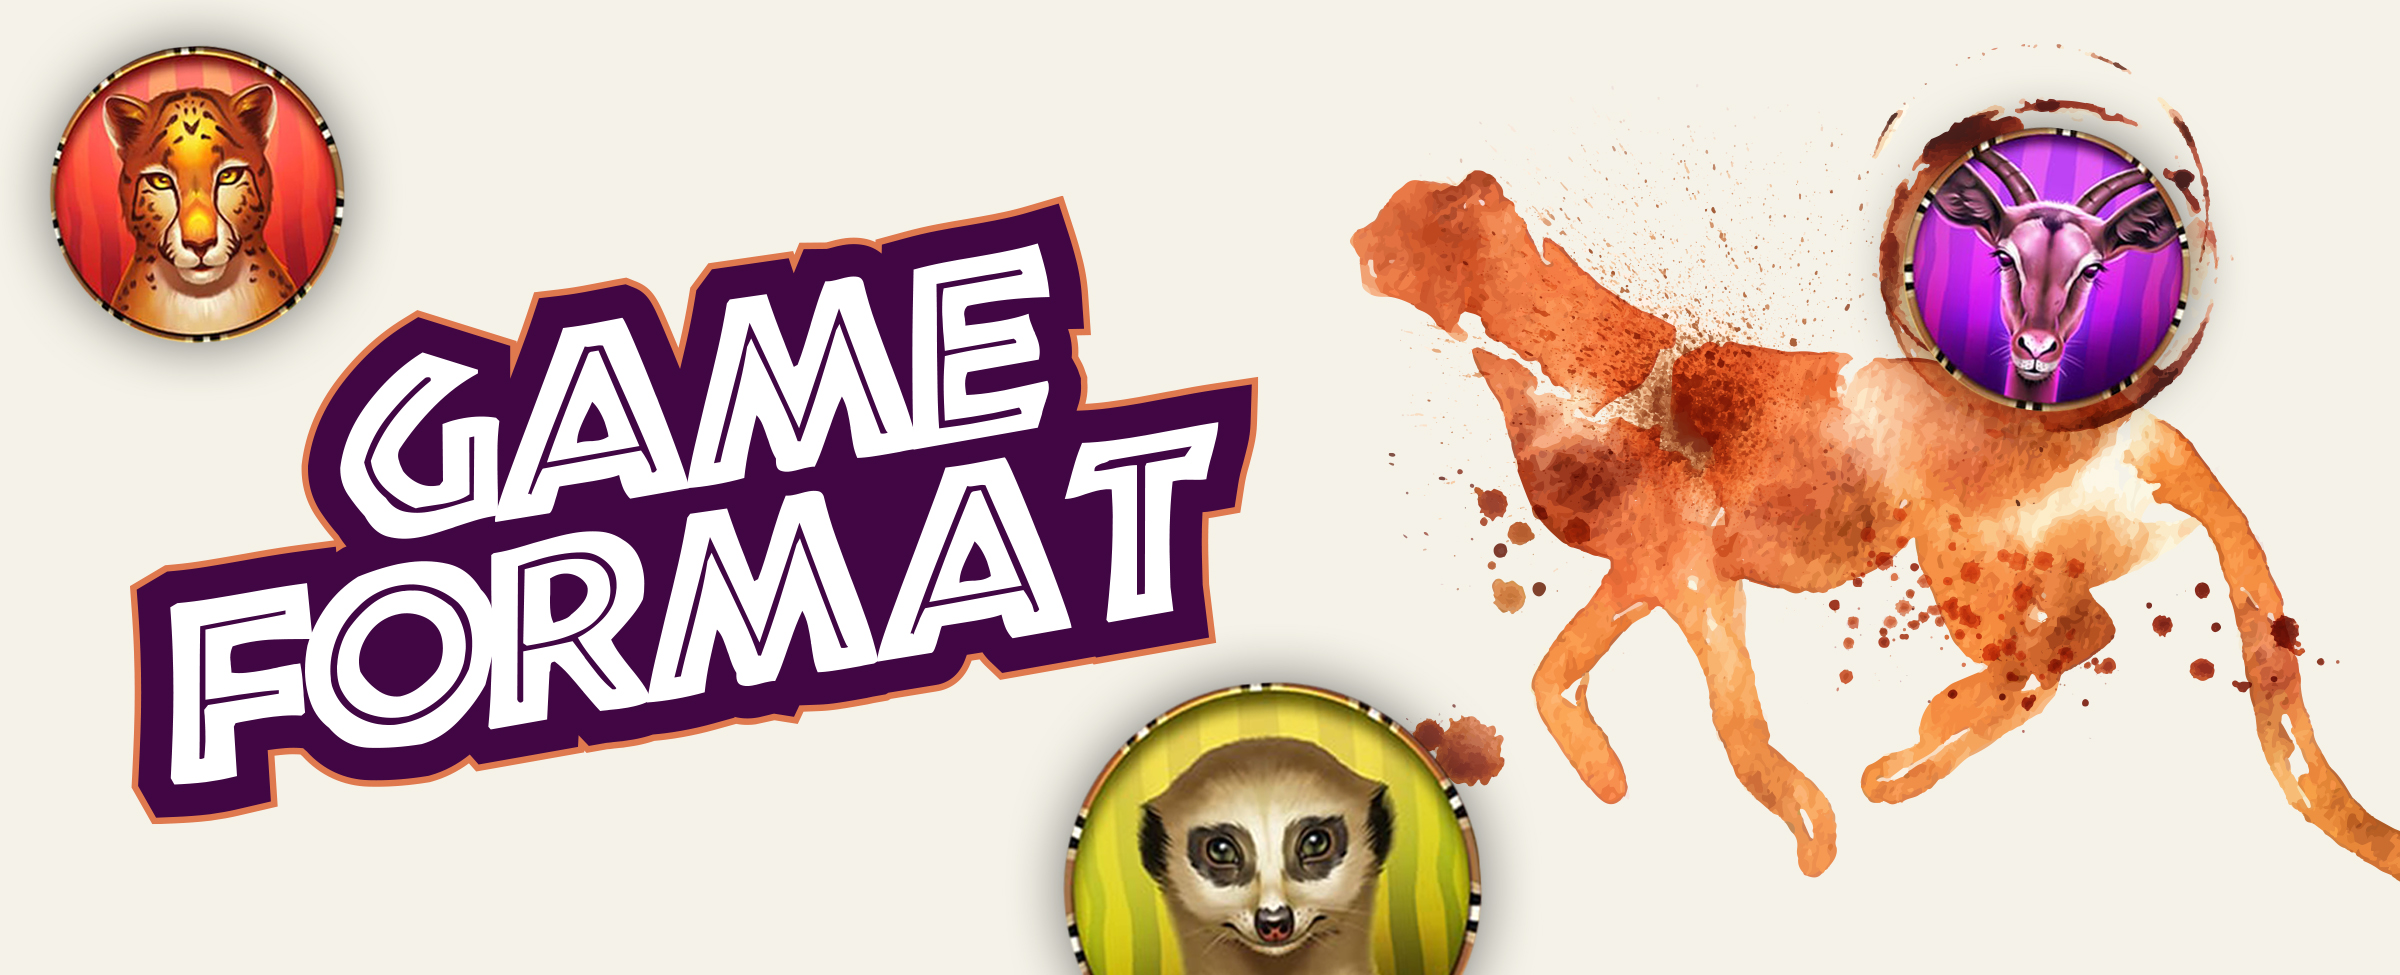 A coffee spill in the shape of a cheetah on an off-white table sits to the right of text that reads “game format”. Surrounding it are three animated symbols from the Golden Savanna slots game.